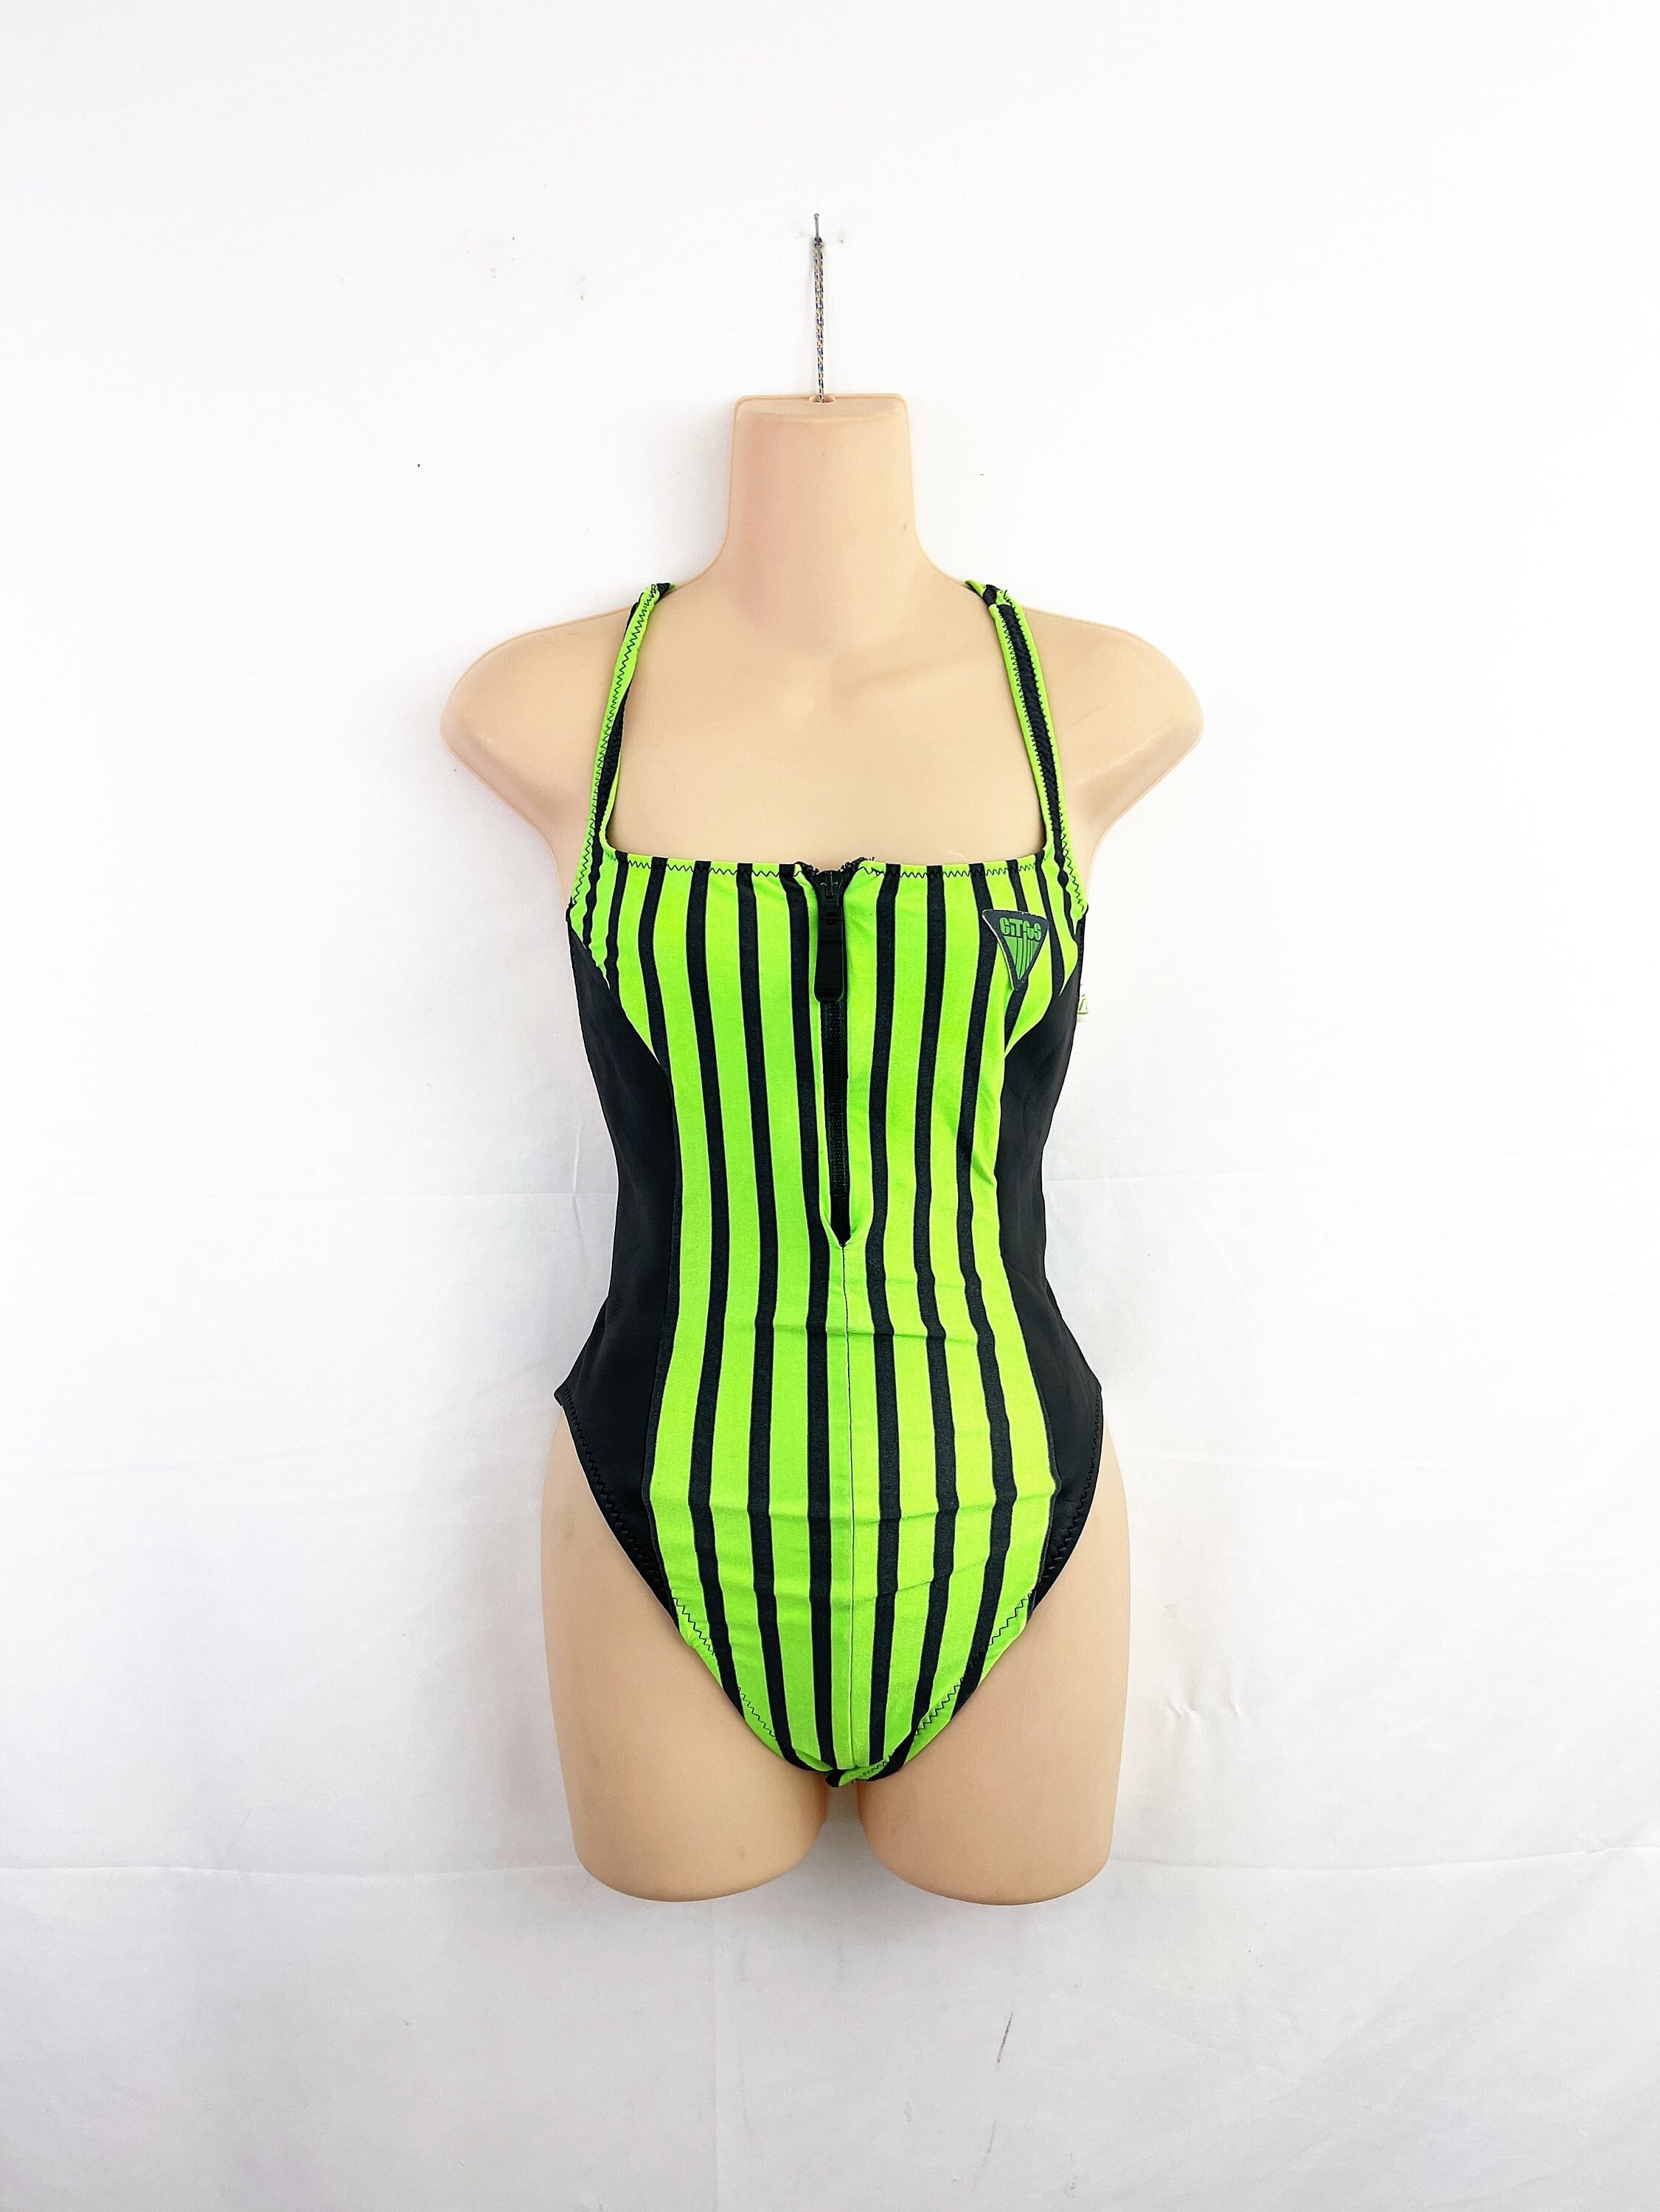 Same Day Yellow Bustier Soutien Gorge Homme Large Neon Green